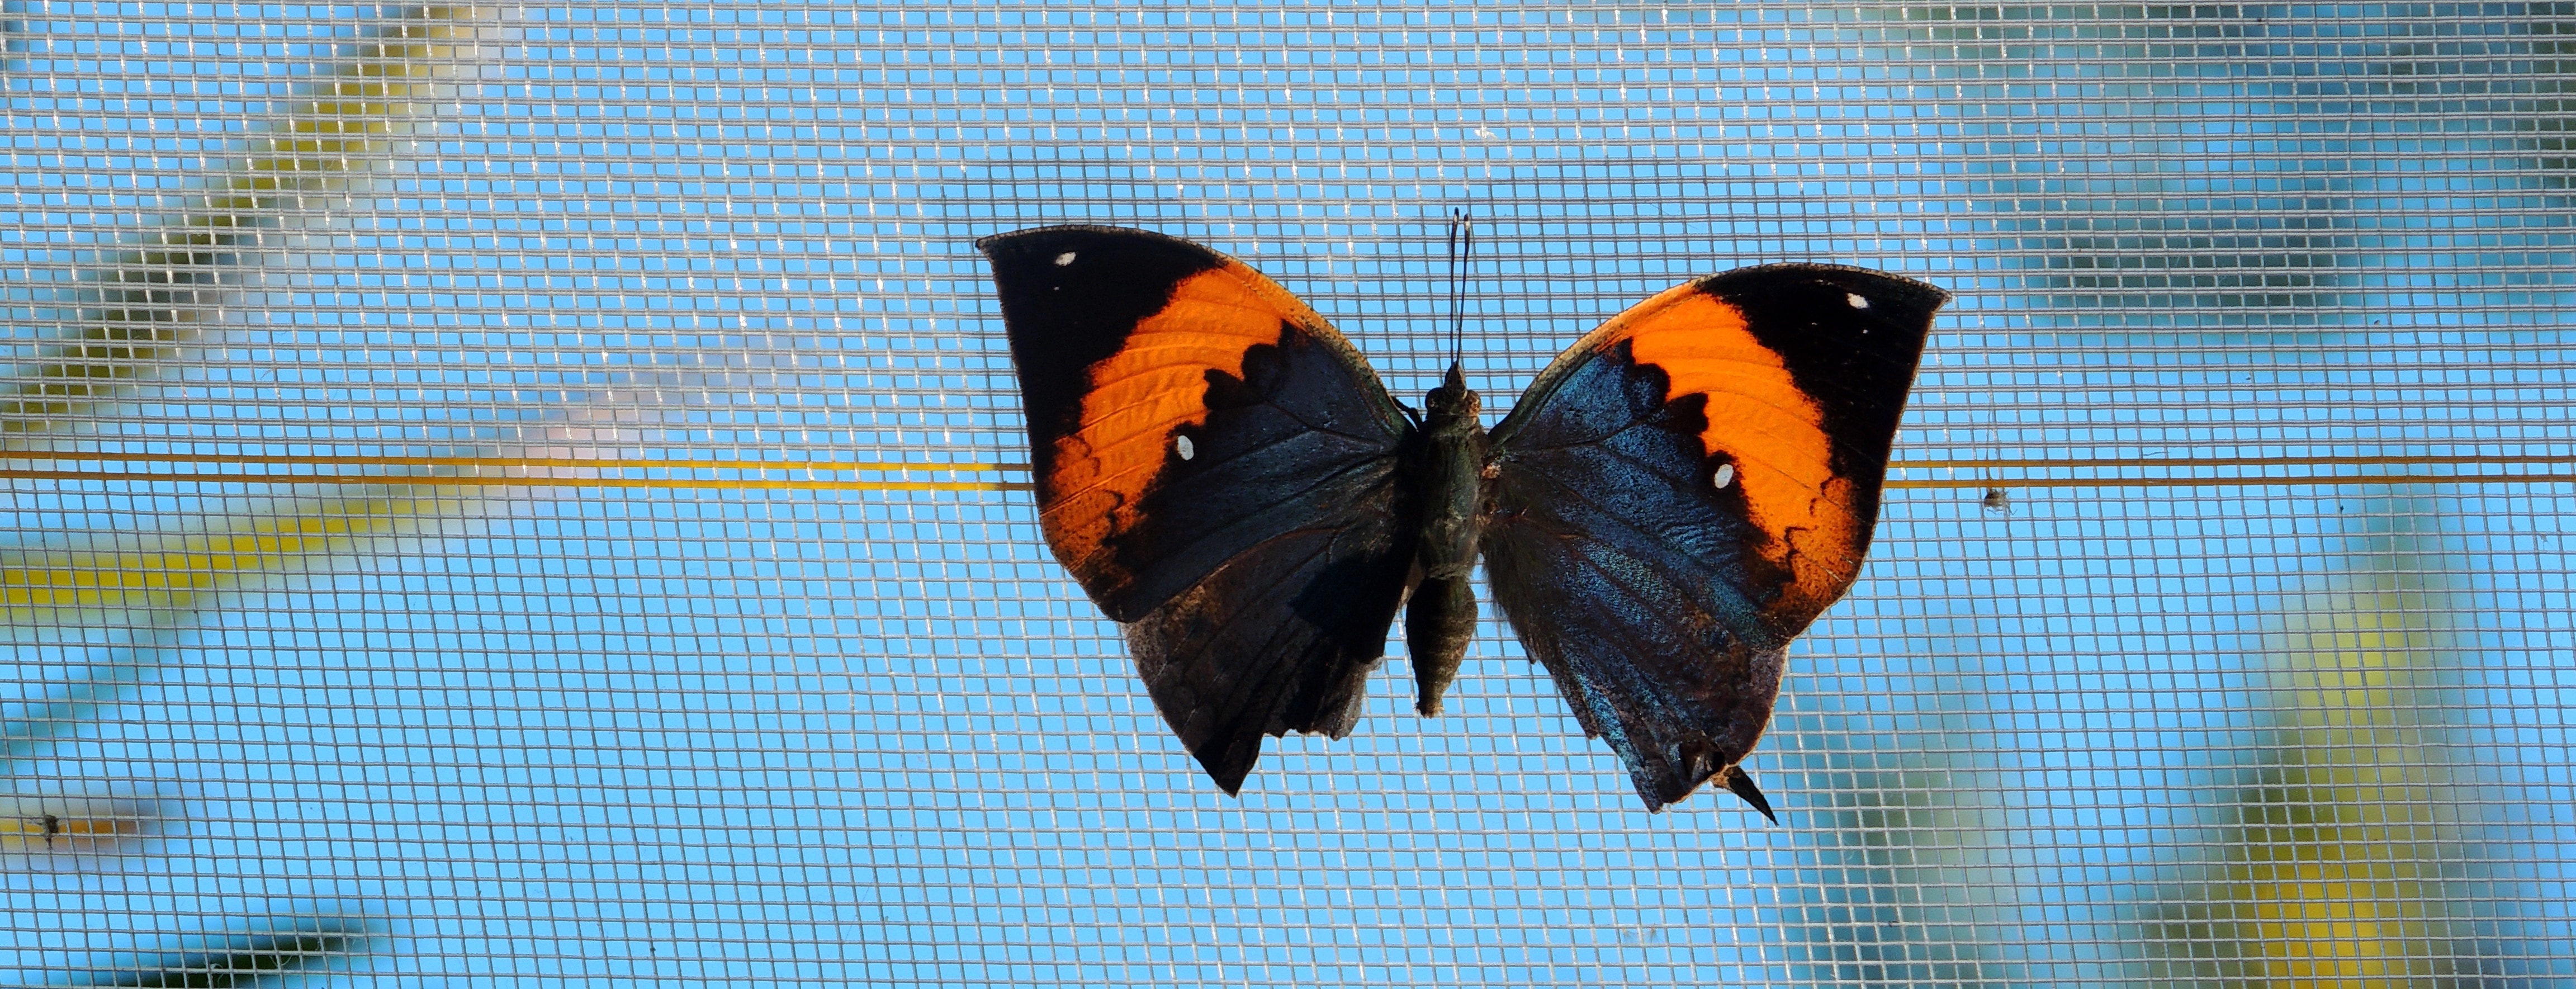 black and orange butterfly